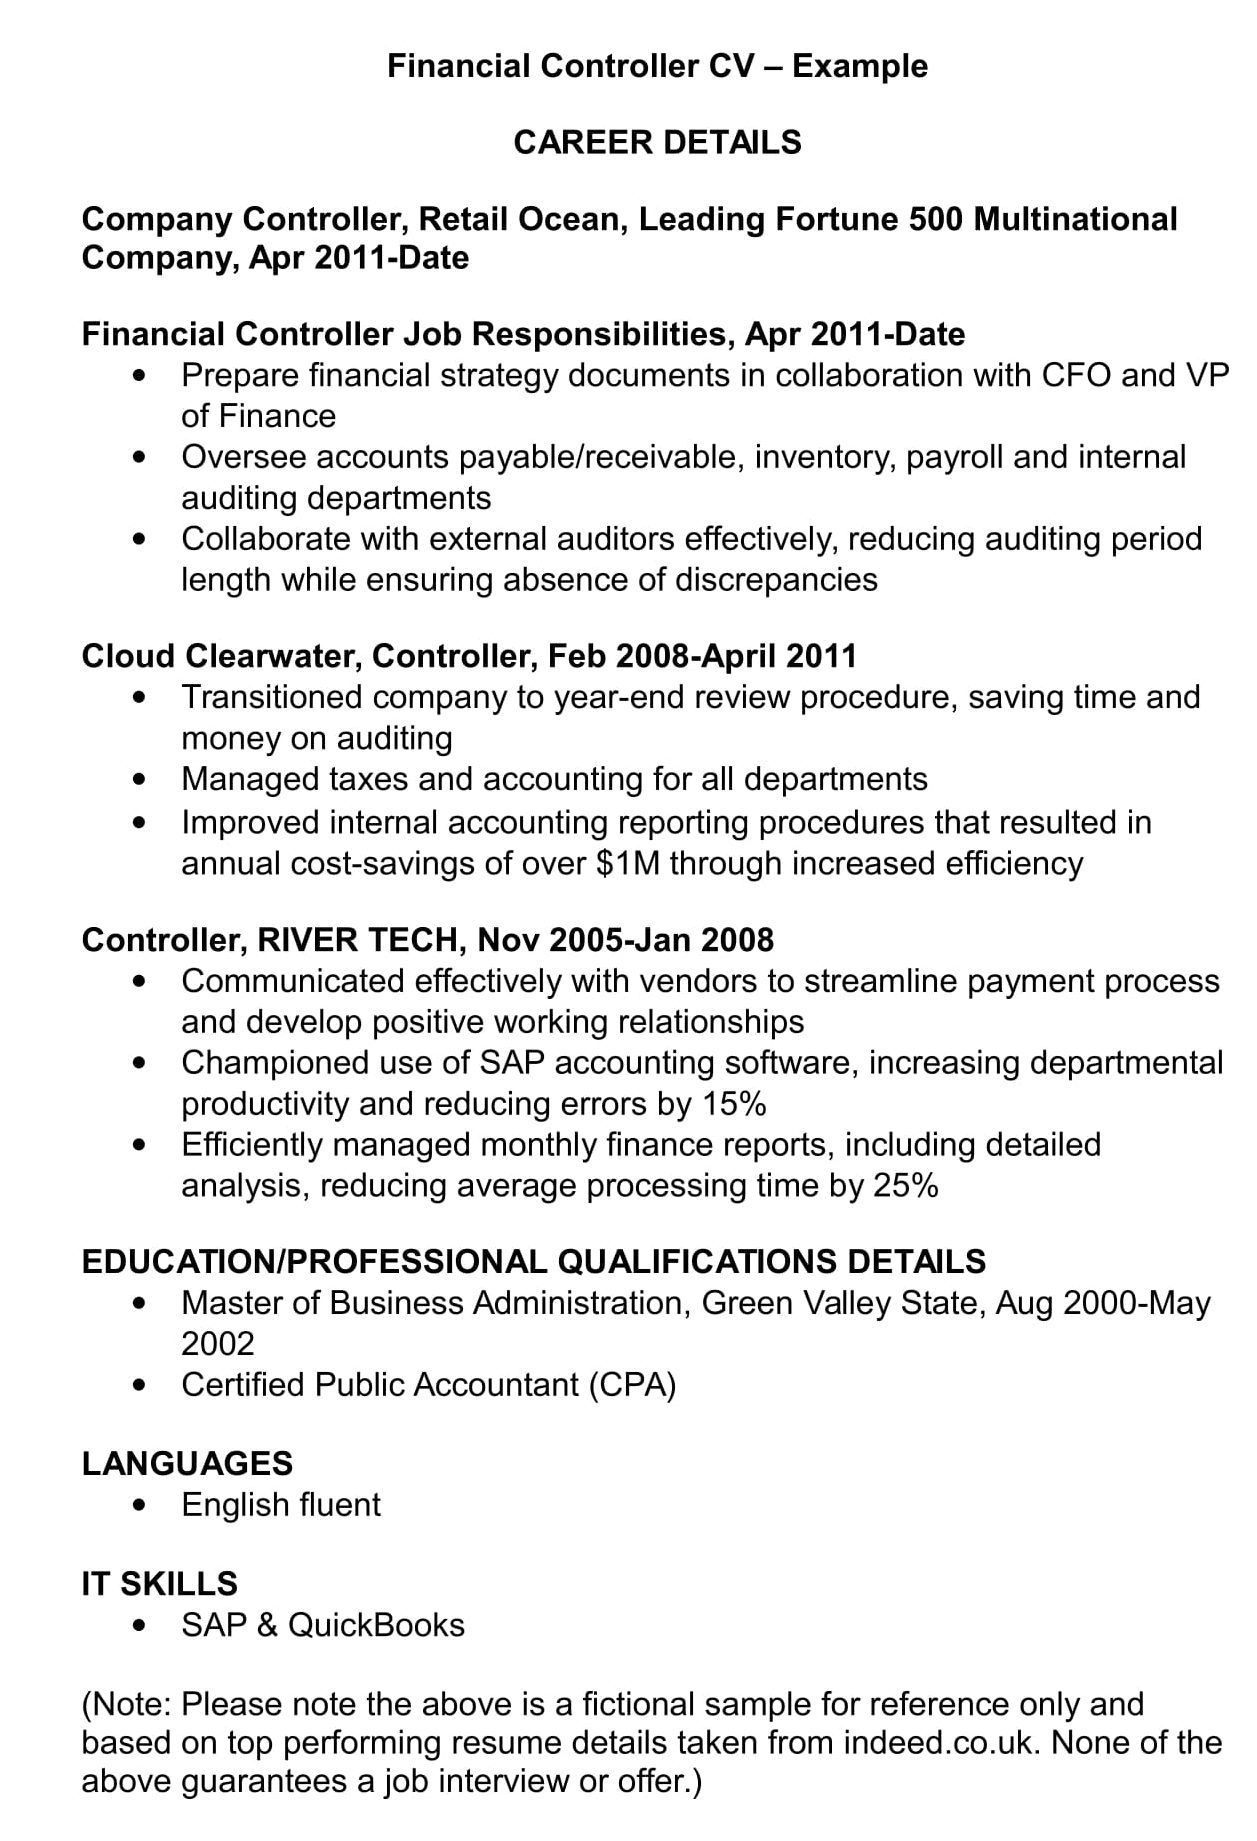 Financial Controller Cv Template And Examples Renaix within dimensions 1257 X 1841